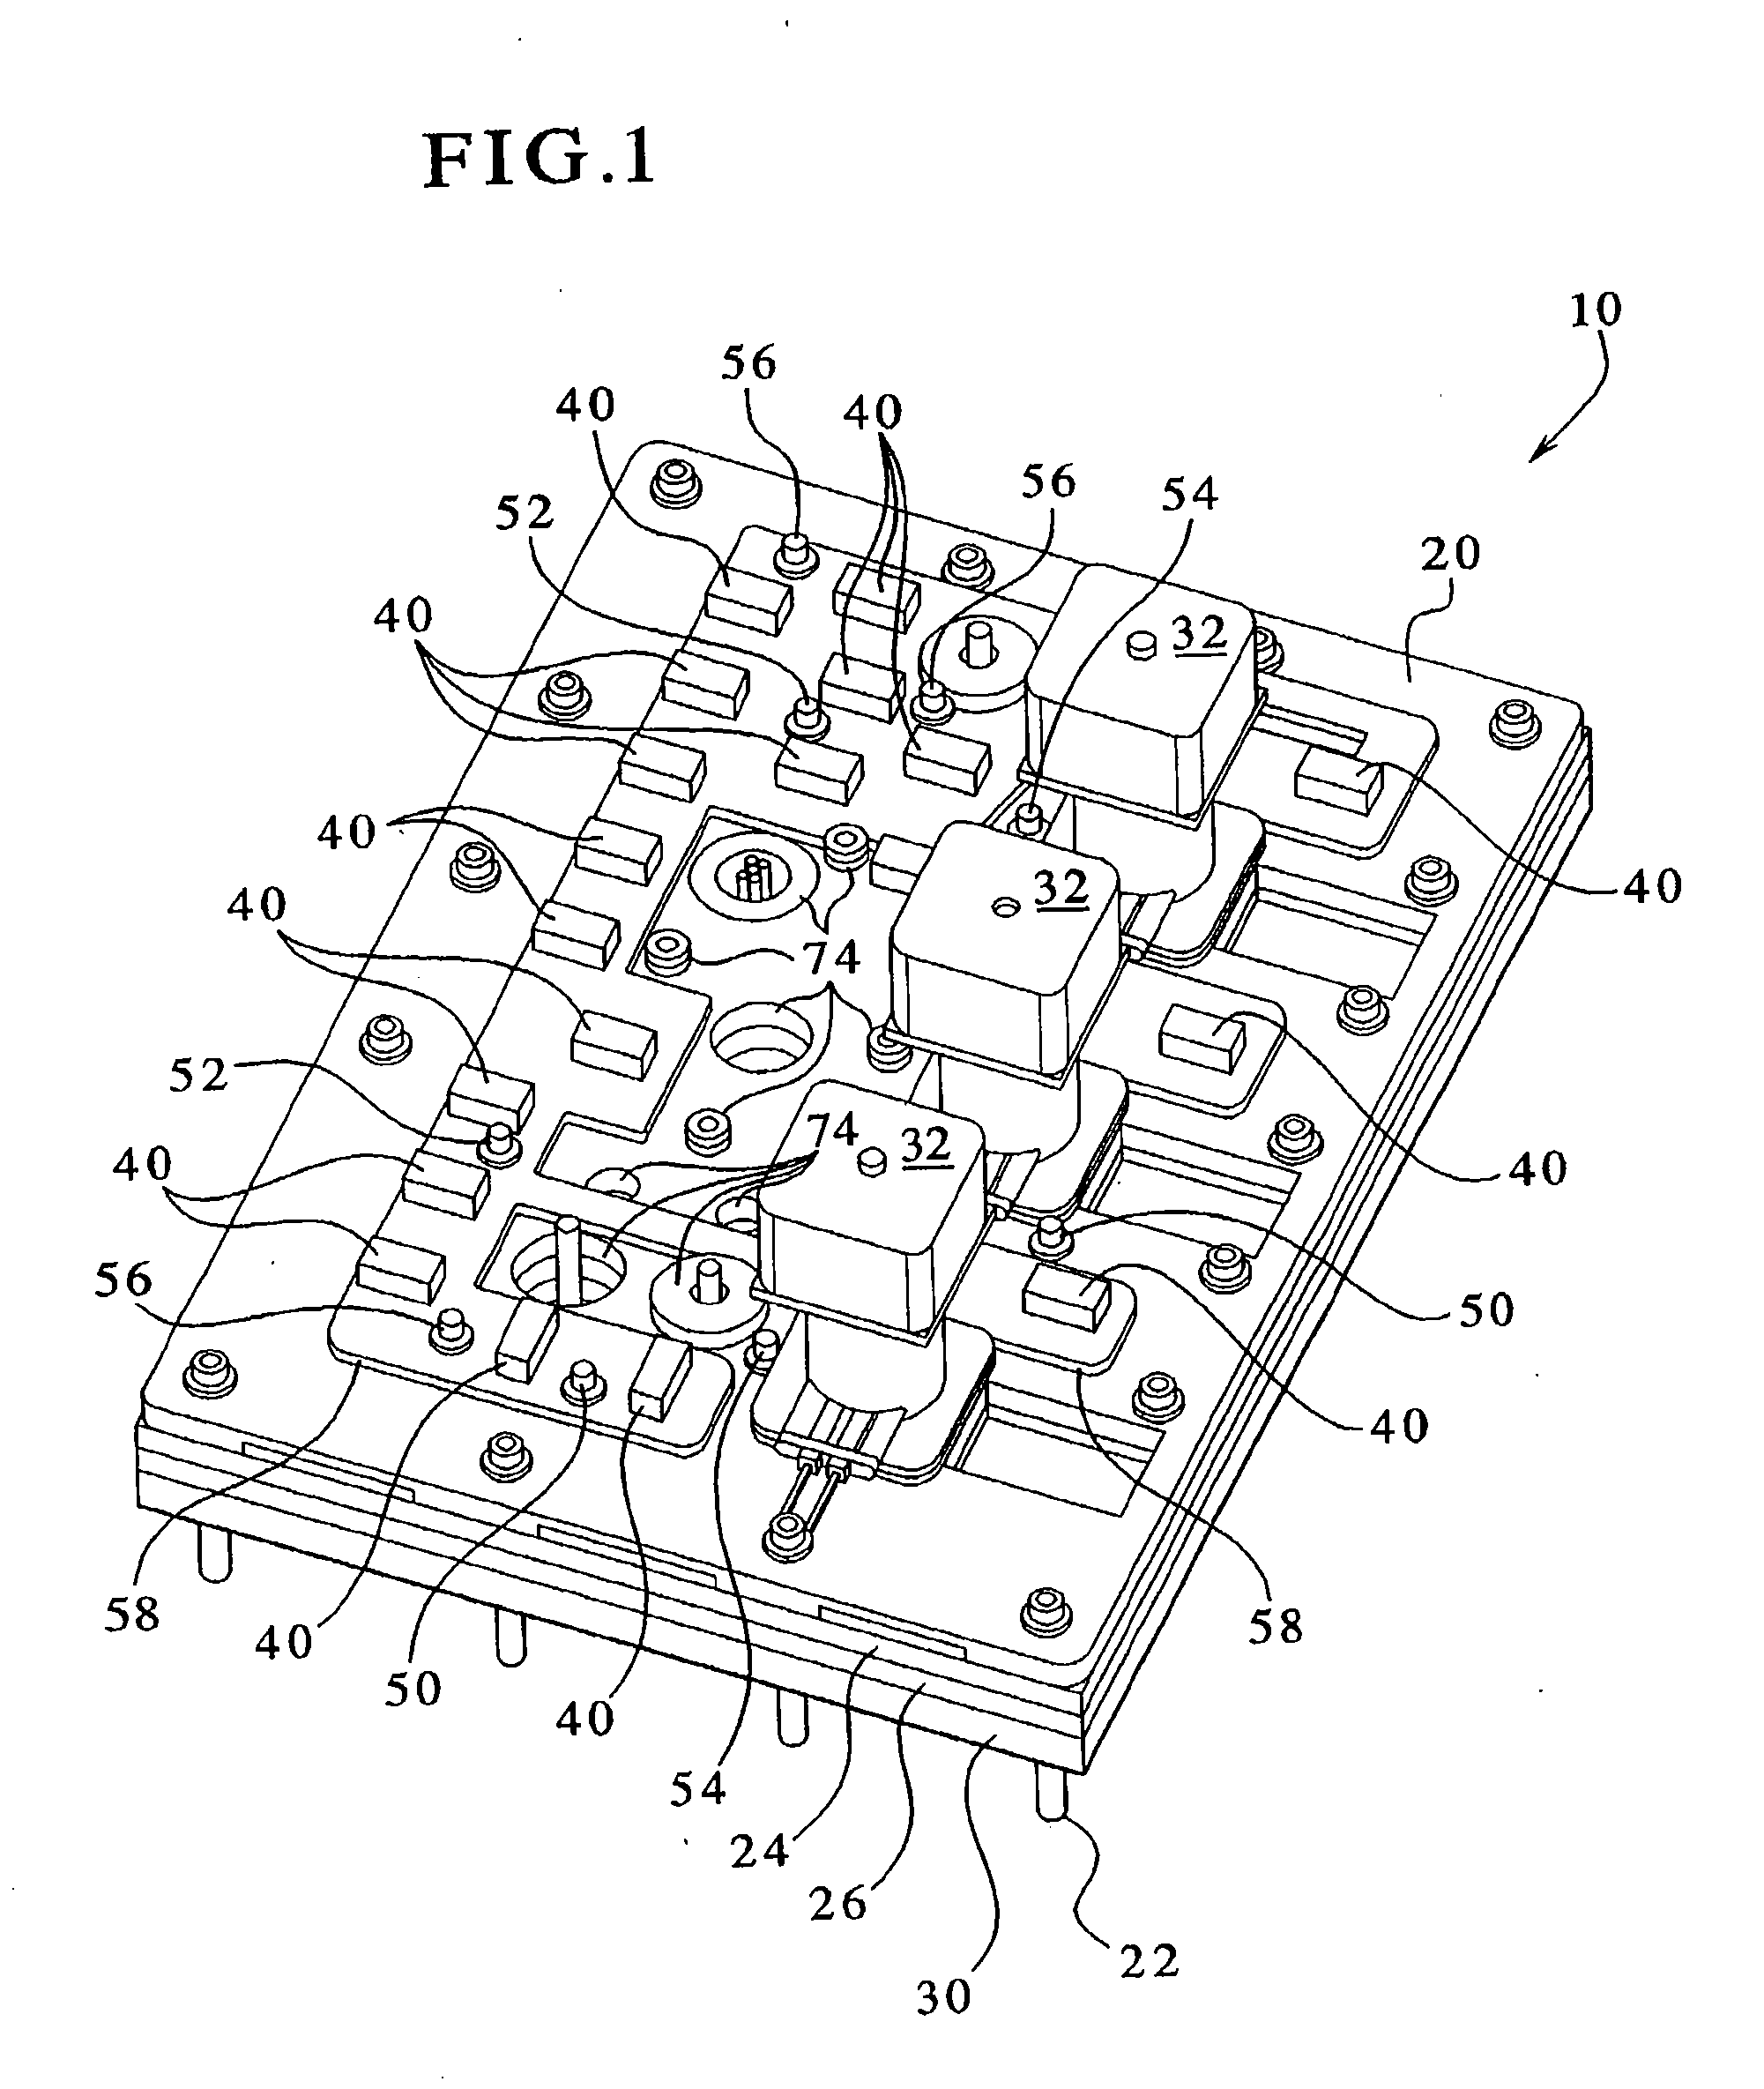 System including machine interface for pumping cassette-based therapies